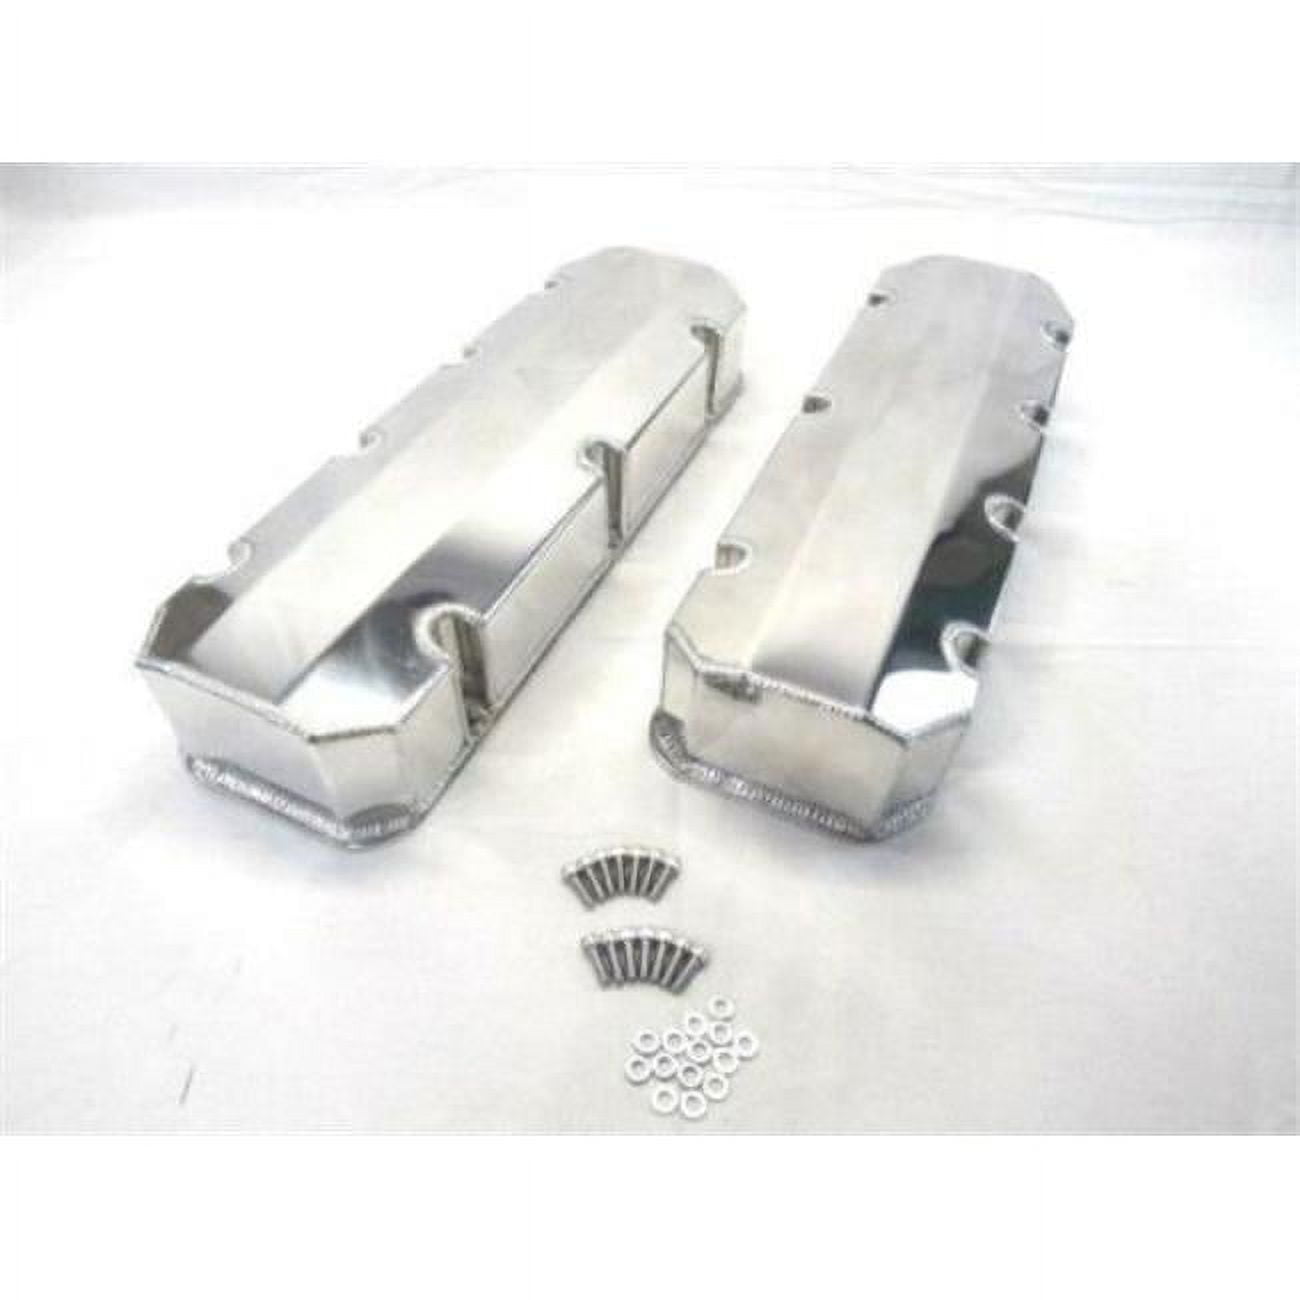 BBC Fabricated Tall Aluminum Valve Cover Short Bolts without Holes, Polished -  Absurdo, AB2205633